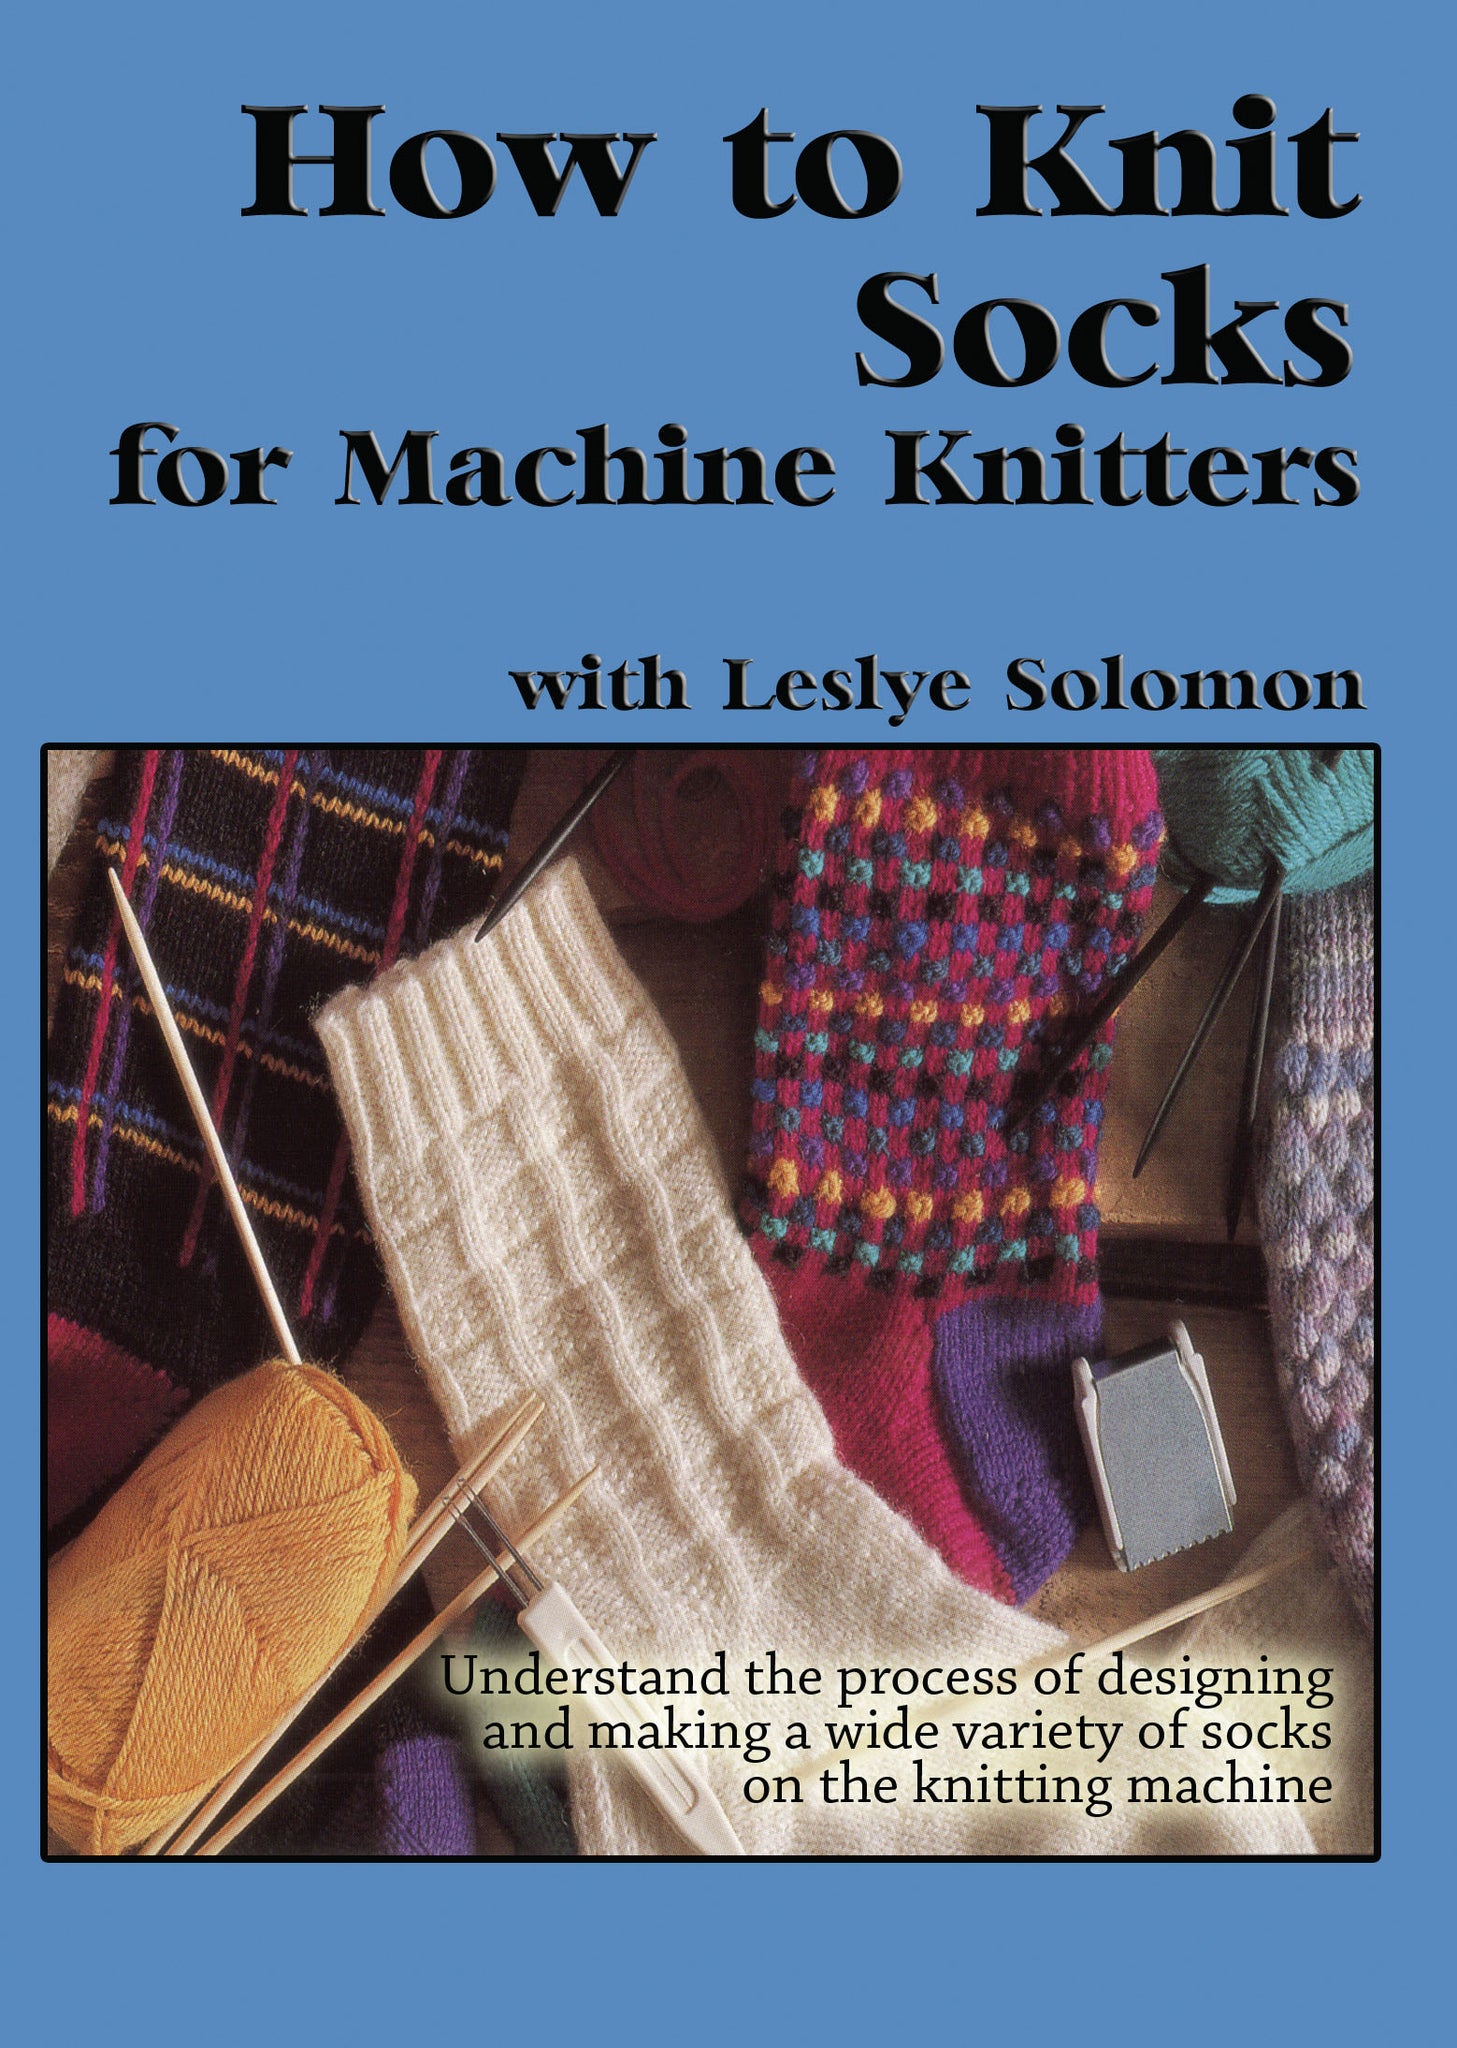 How to Knit Socks for Machine Knitters DVD -  Digital Download